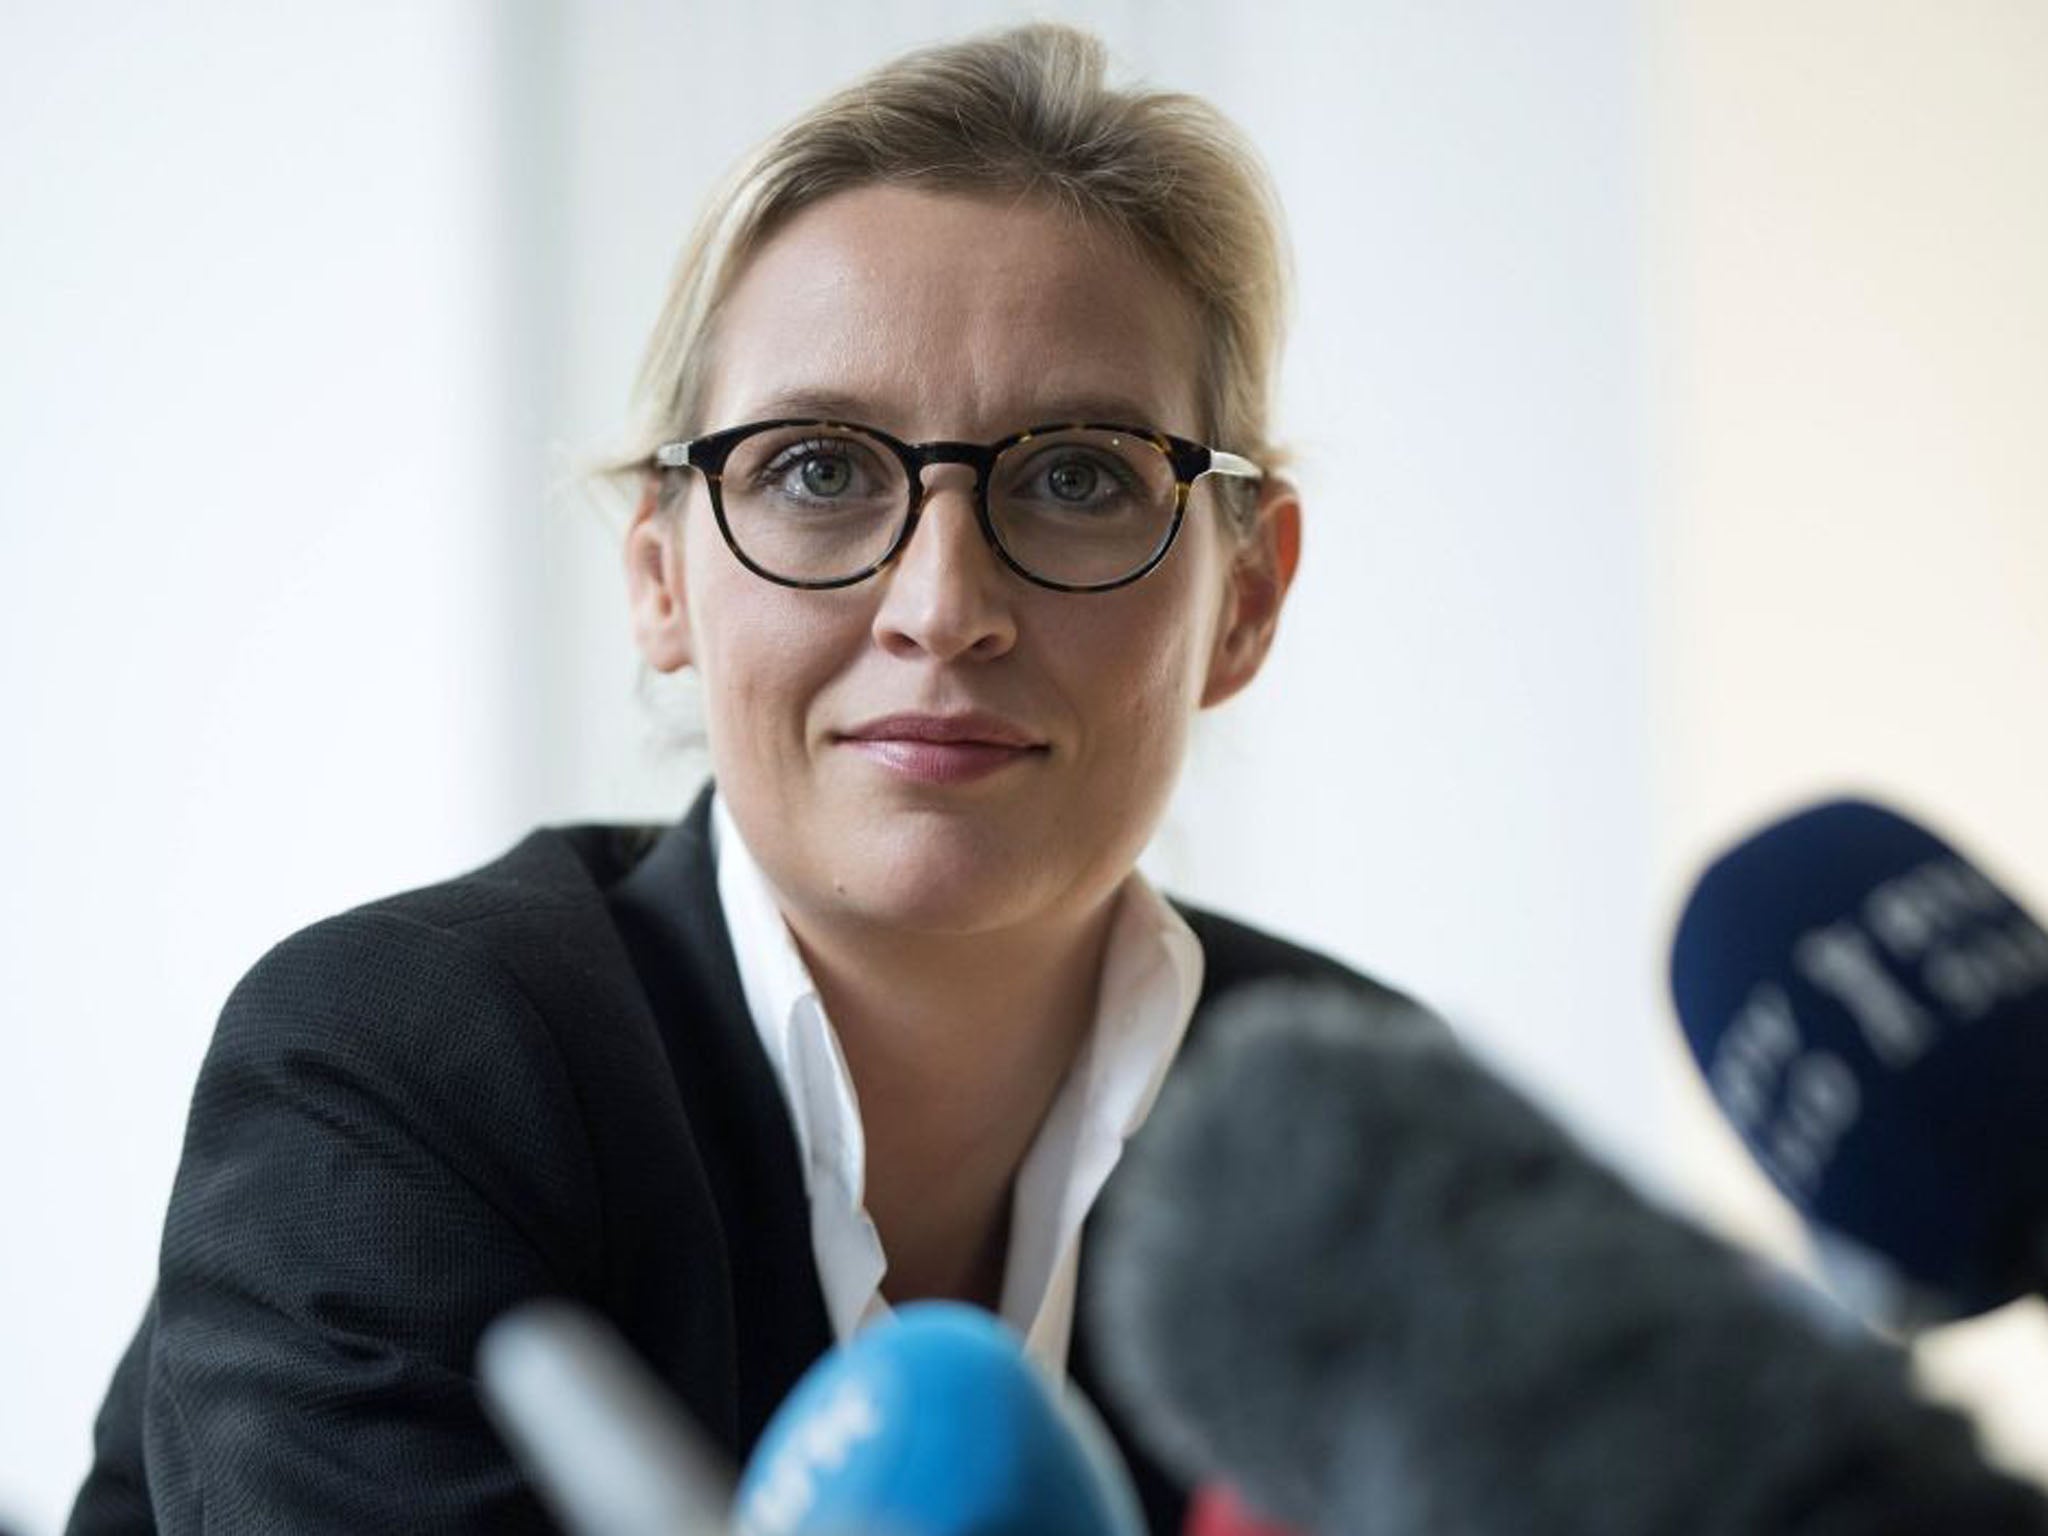 Alice Weidel shrugged and smiled when asked about Donald Trump's conduct at a German press conference